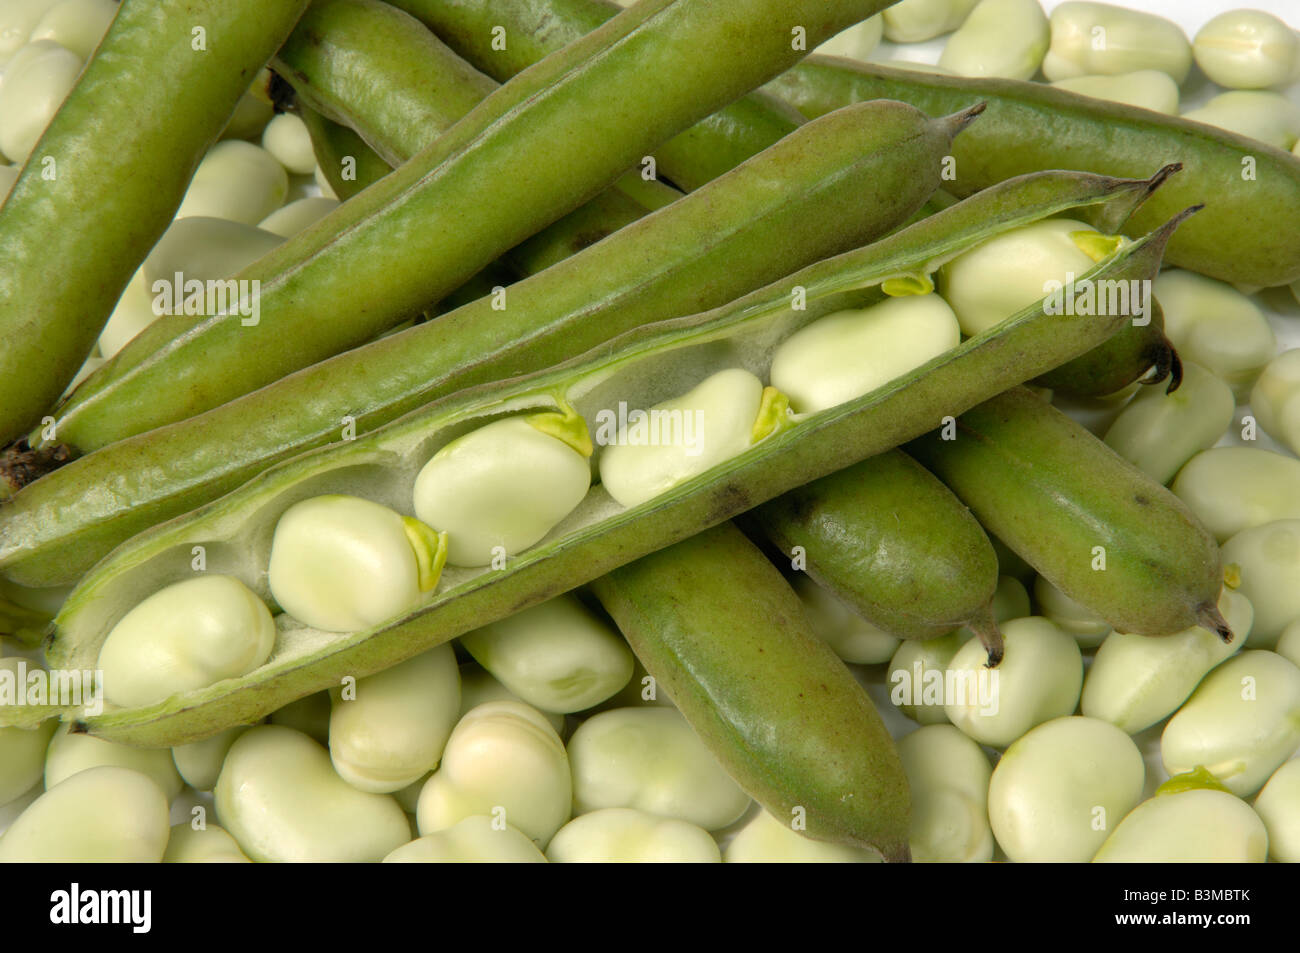 English grown vegetable produce typical supermarket bought broad beans whole and opend pods Stock Photo